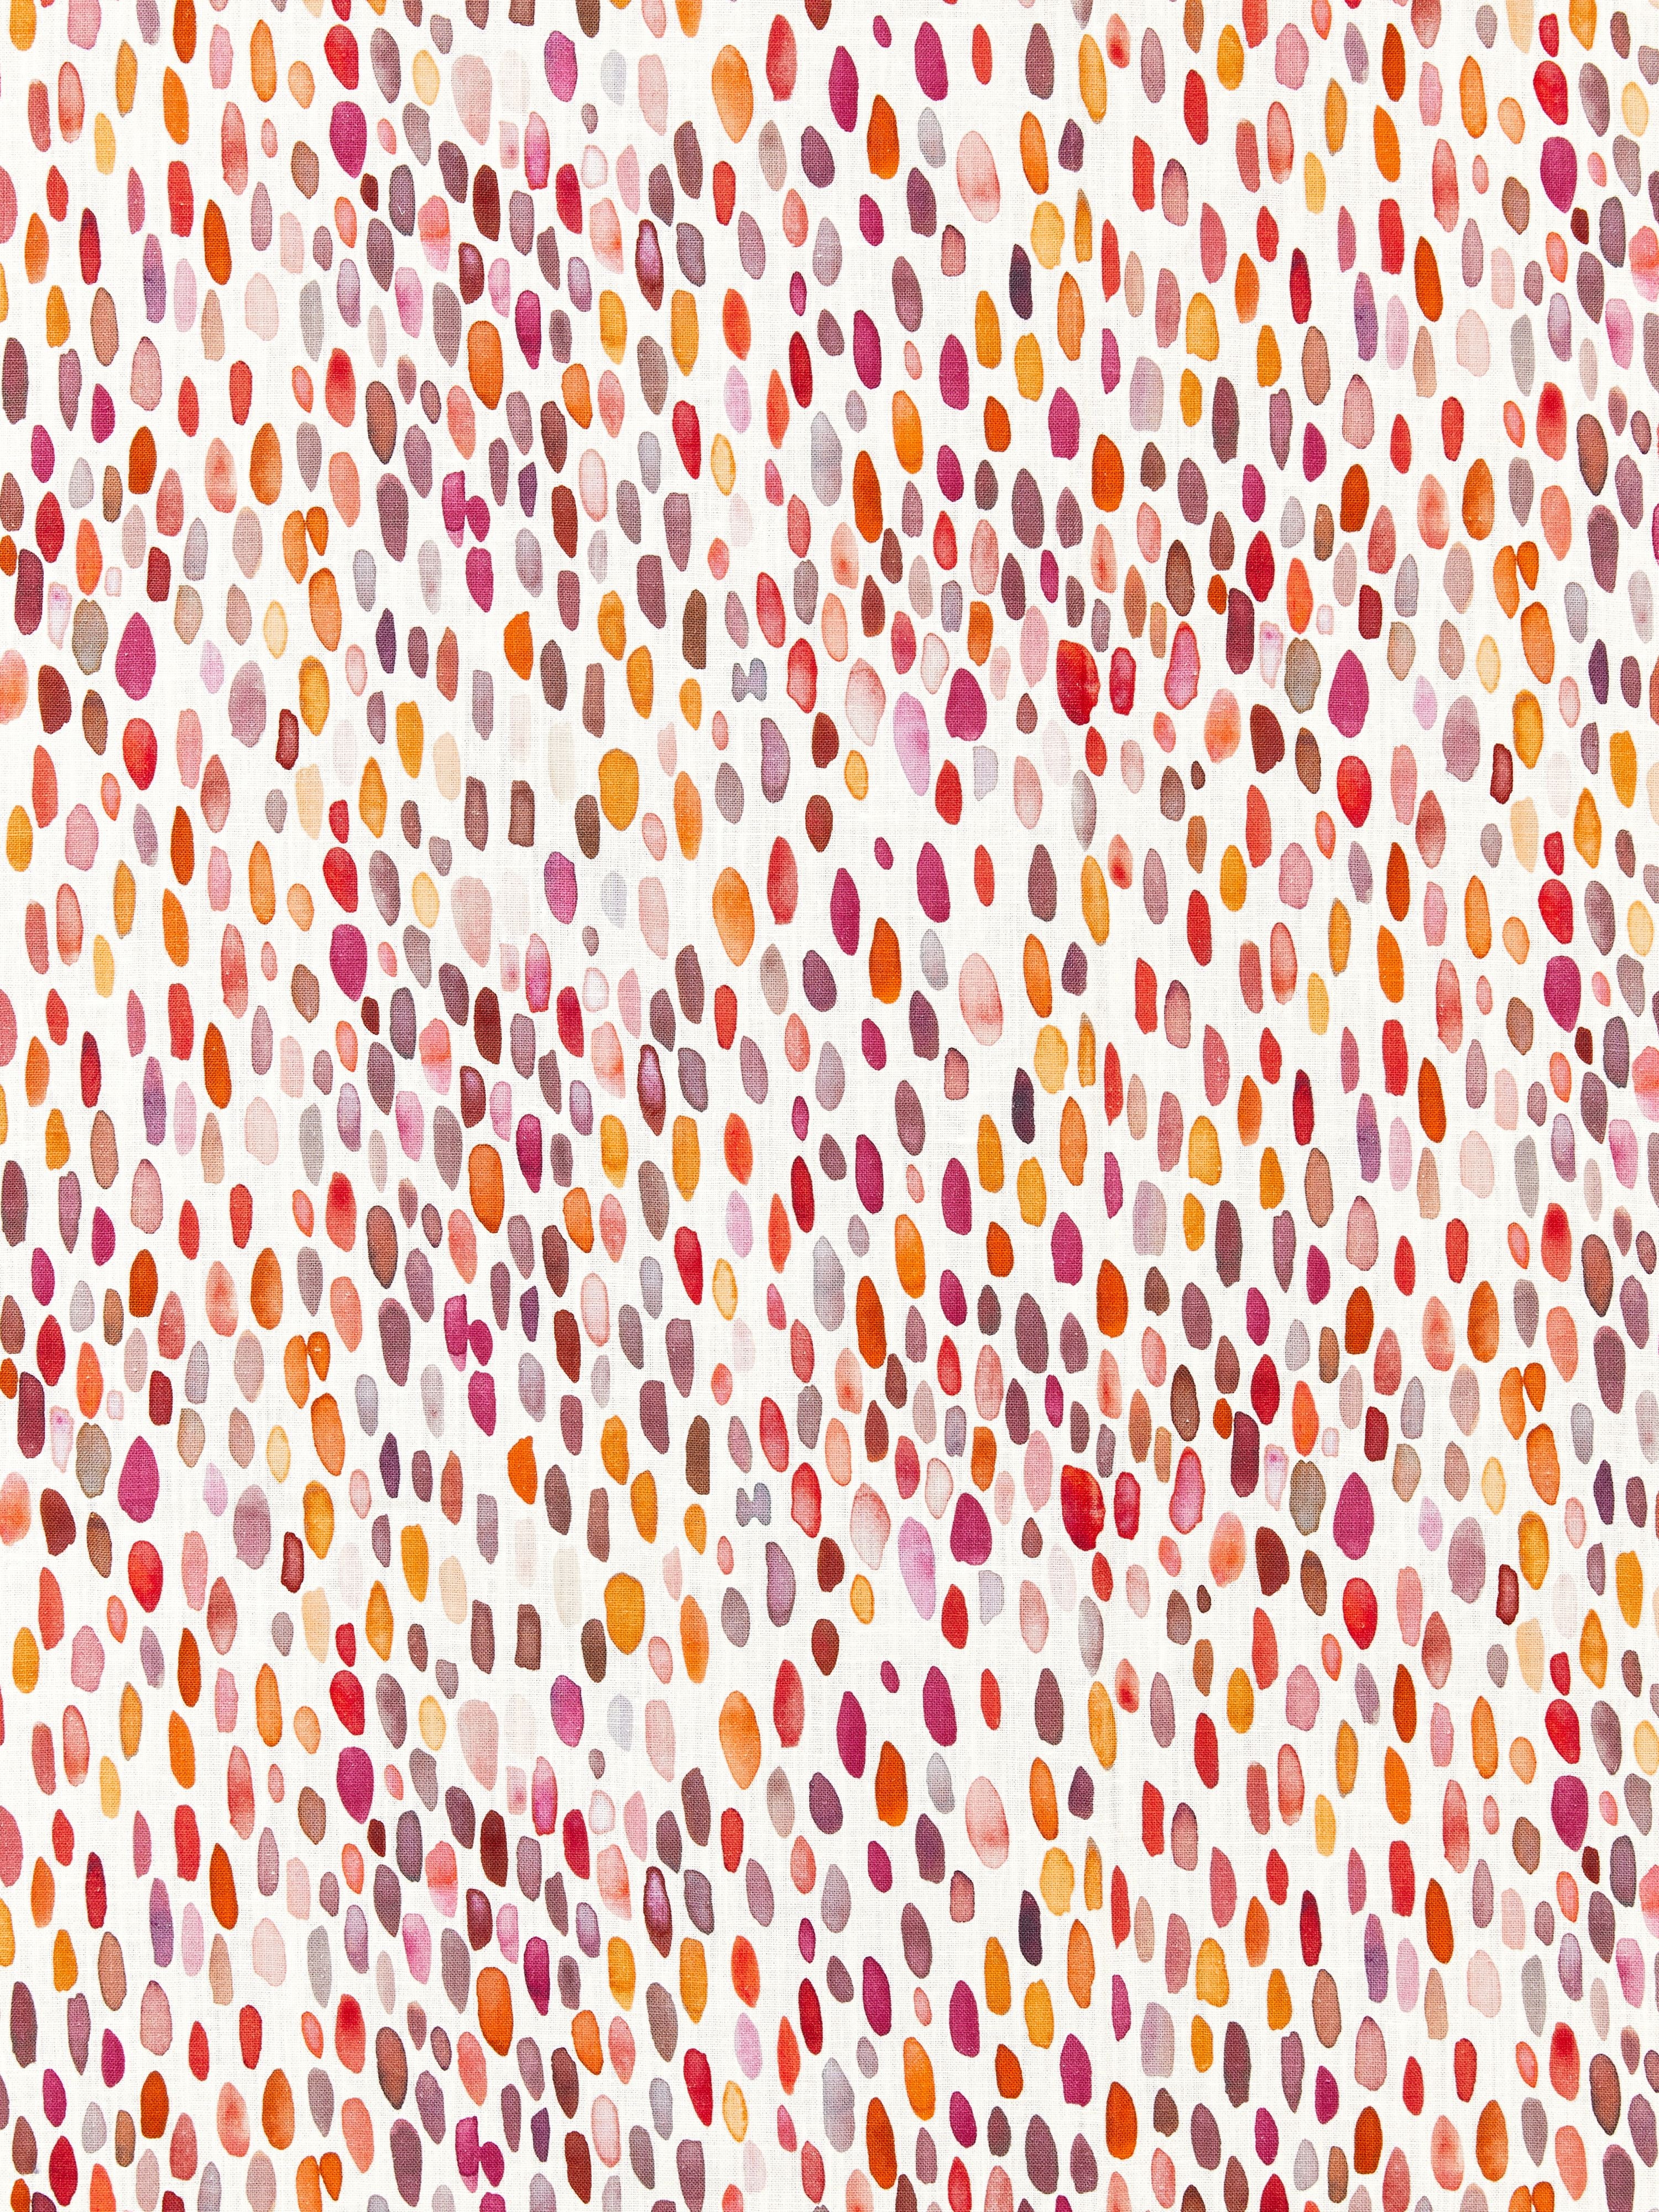 Jamboree Linen Print fabric in wild berry color - pattern number LO 00075096 - by Scalamandre in the Old World Weavers collection